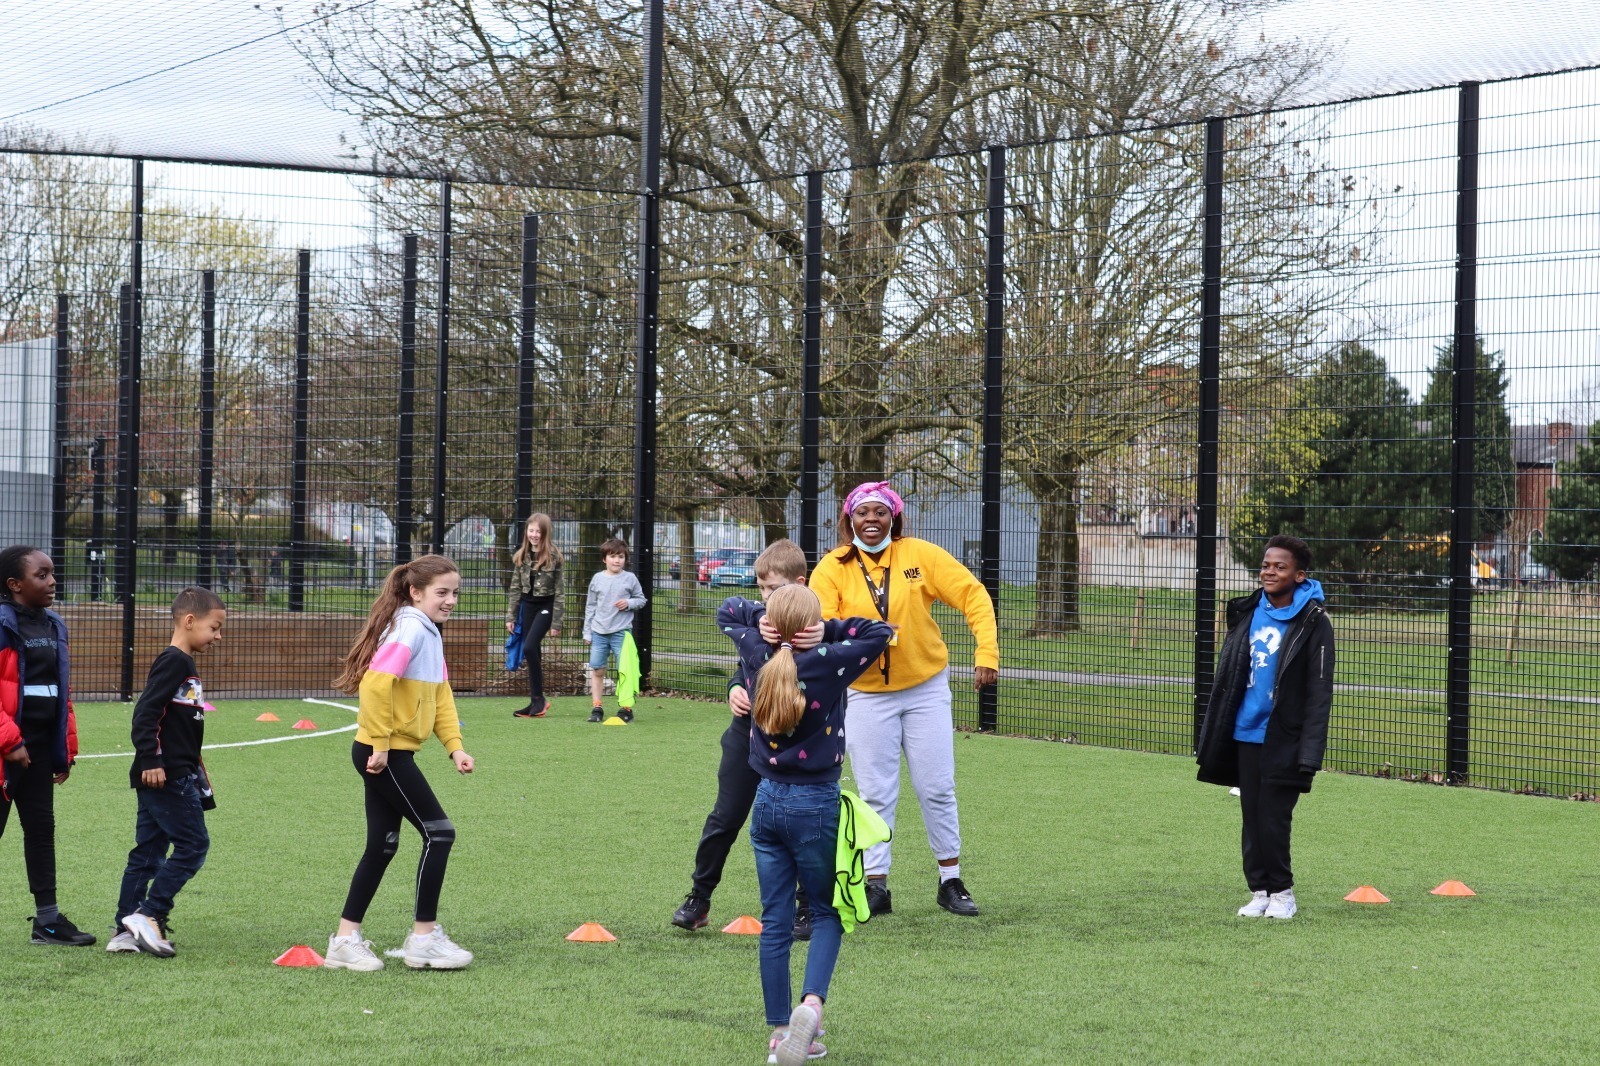 A group of young people enjoy a multi-sports session outdoors.